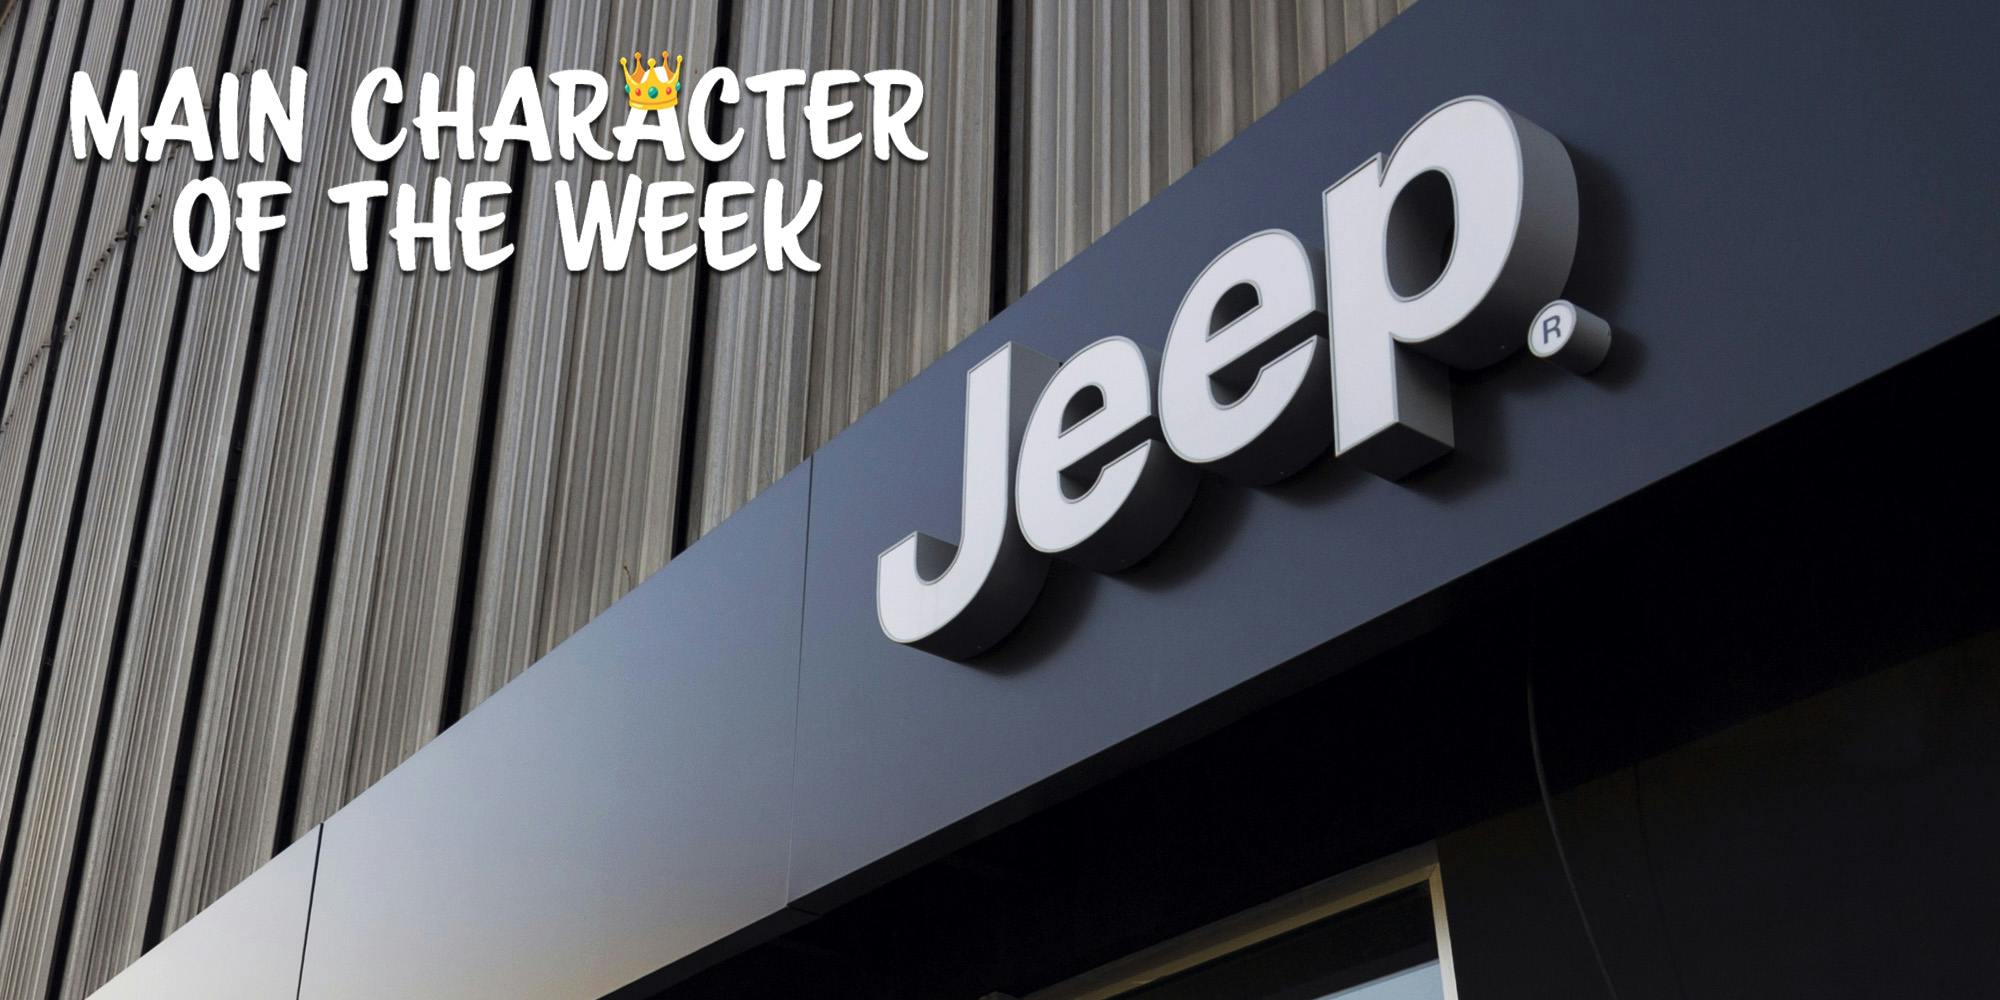 A sign at a Jeep dealership. There is text in the top left corner that says 'Main Character of the Week' in a Daily Dot newsletter web_crawlr font.